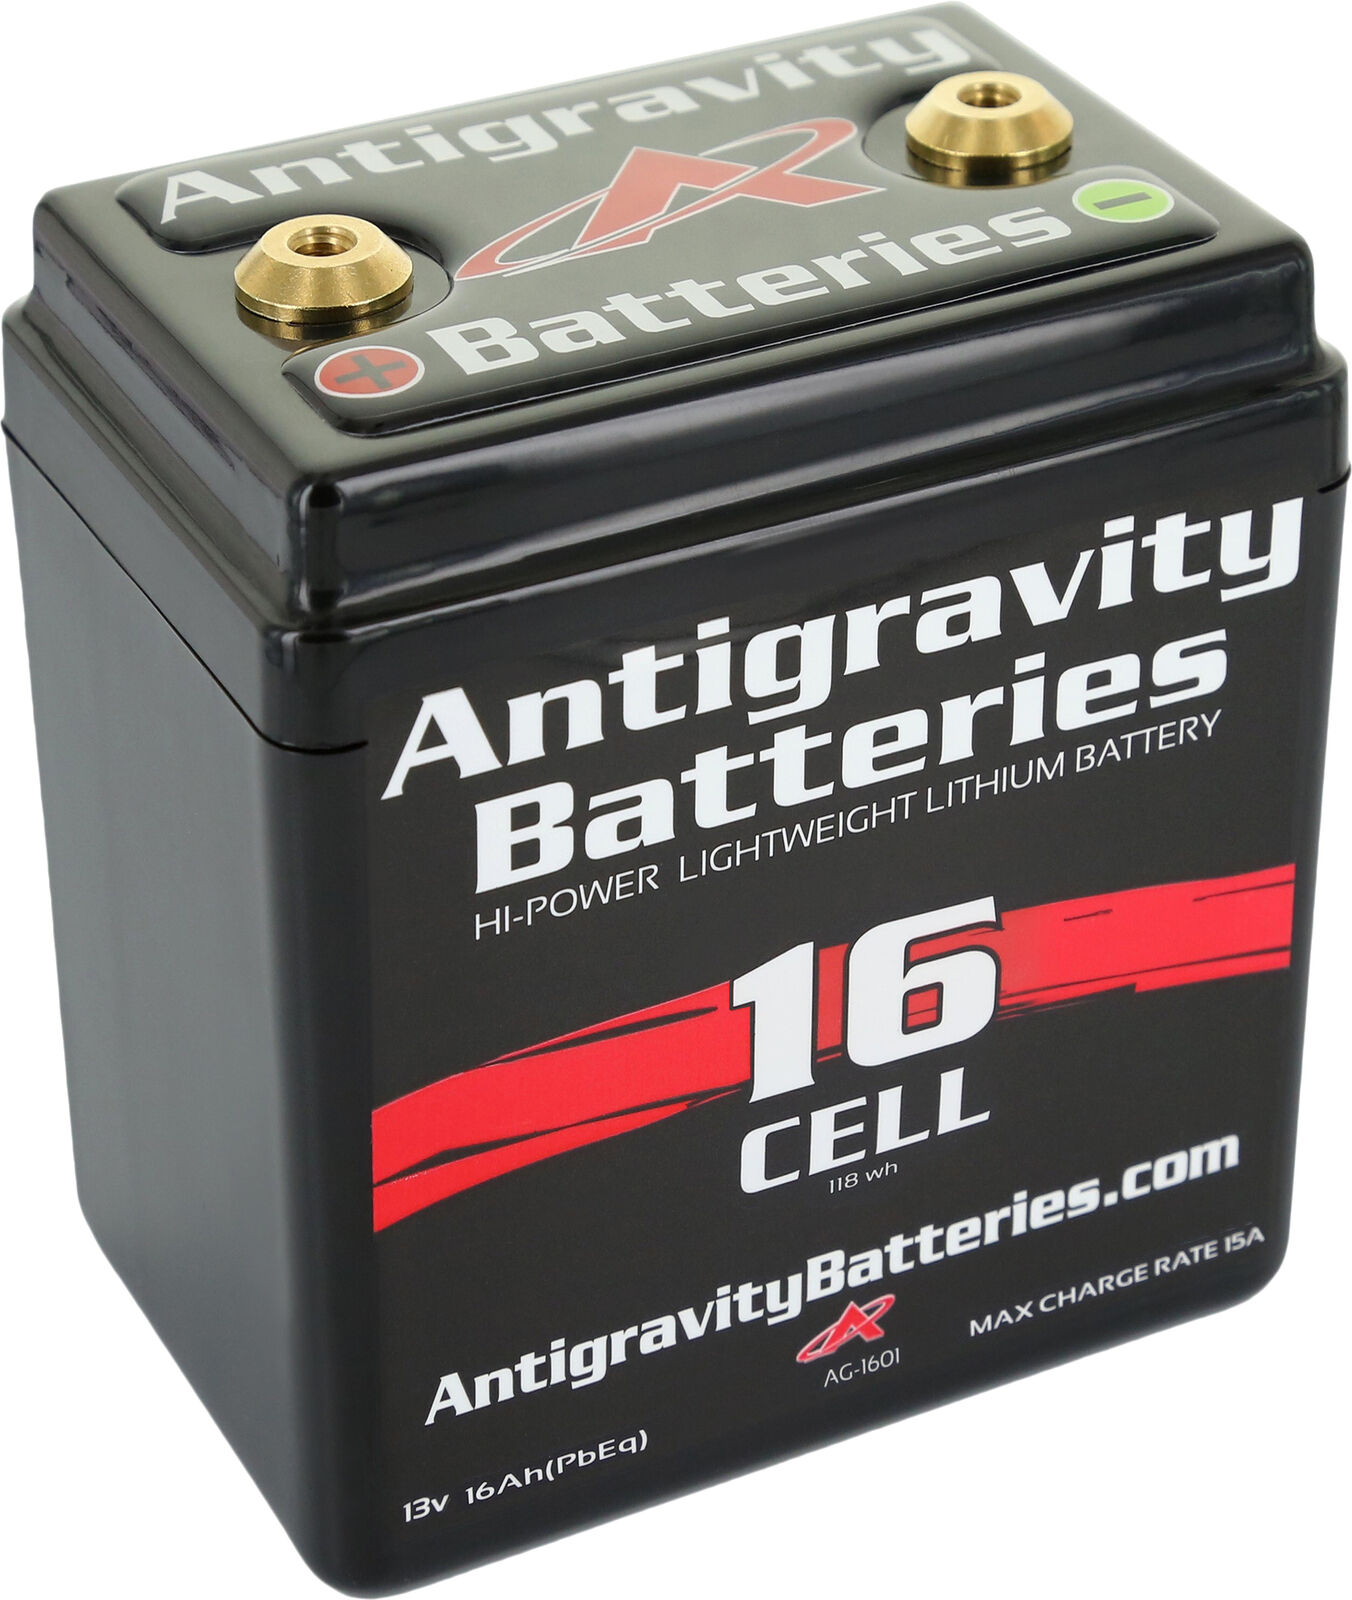 Small Case Lithium Ion Battery AG-1601 480 CA Antigravity